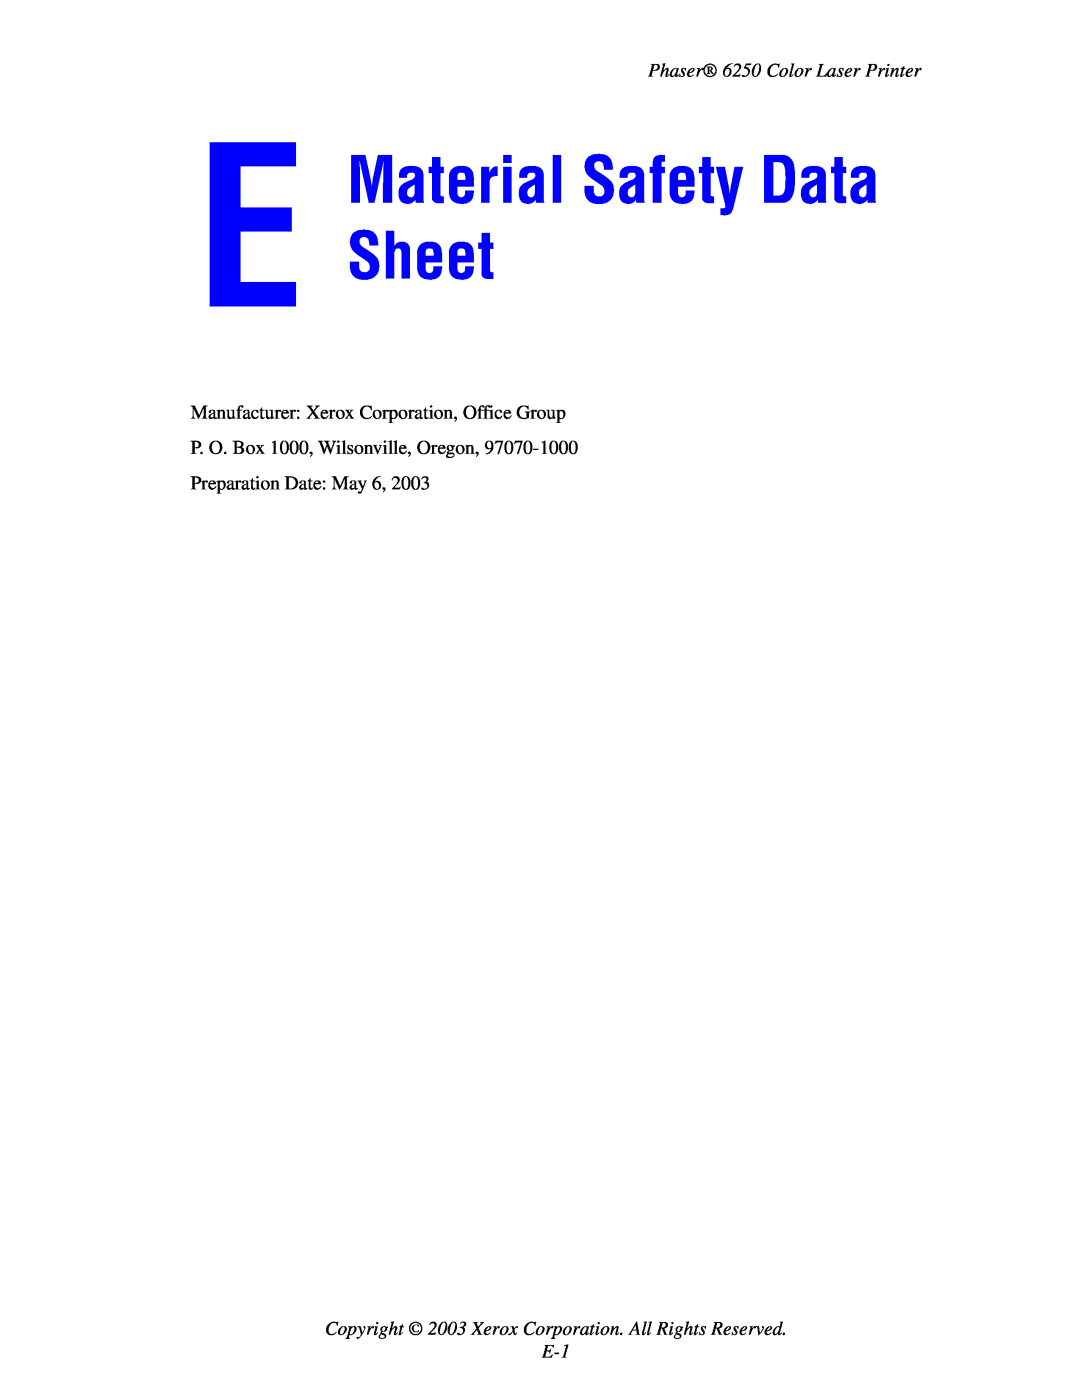 Xerox 6250 manual Material Safety Data Sheet, Copyright 2003 Xerox Corporation. All Rights Reserved E-1 